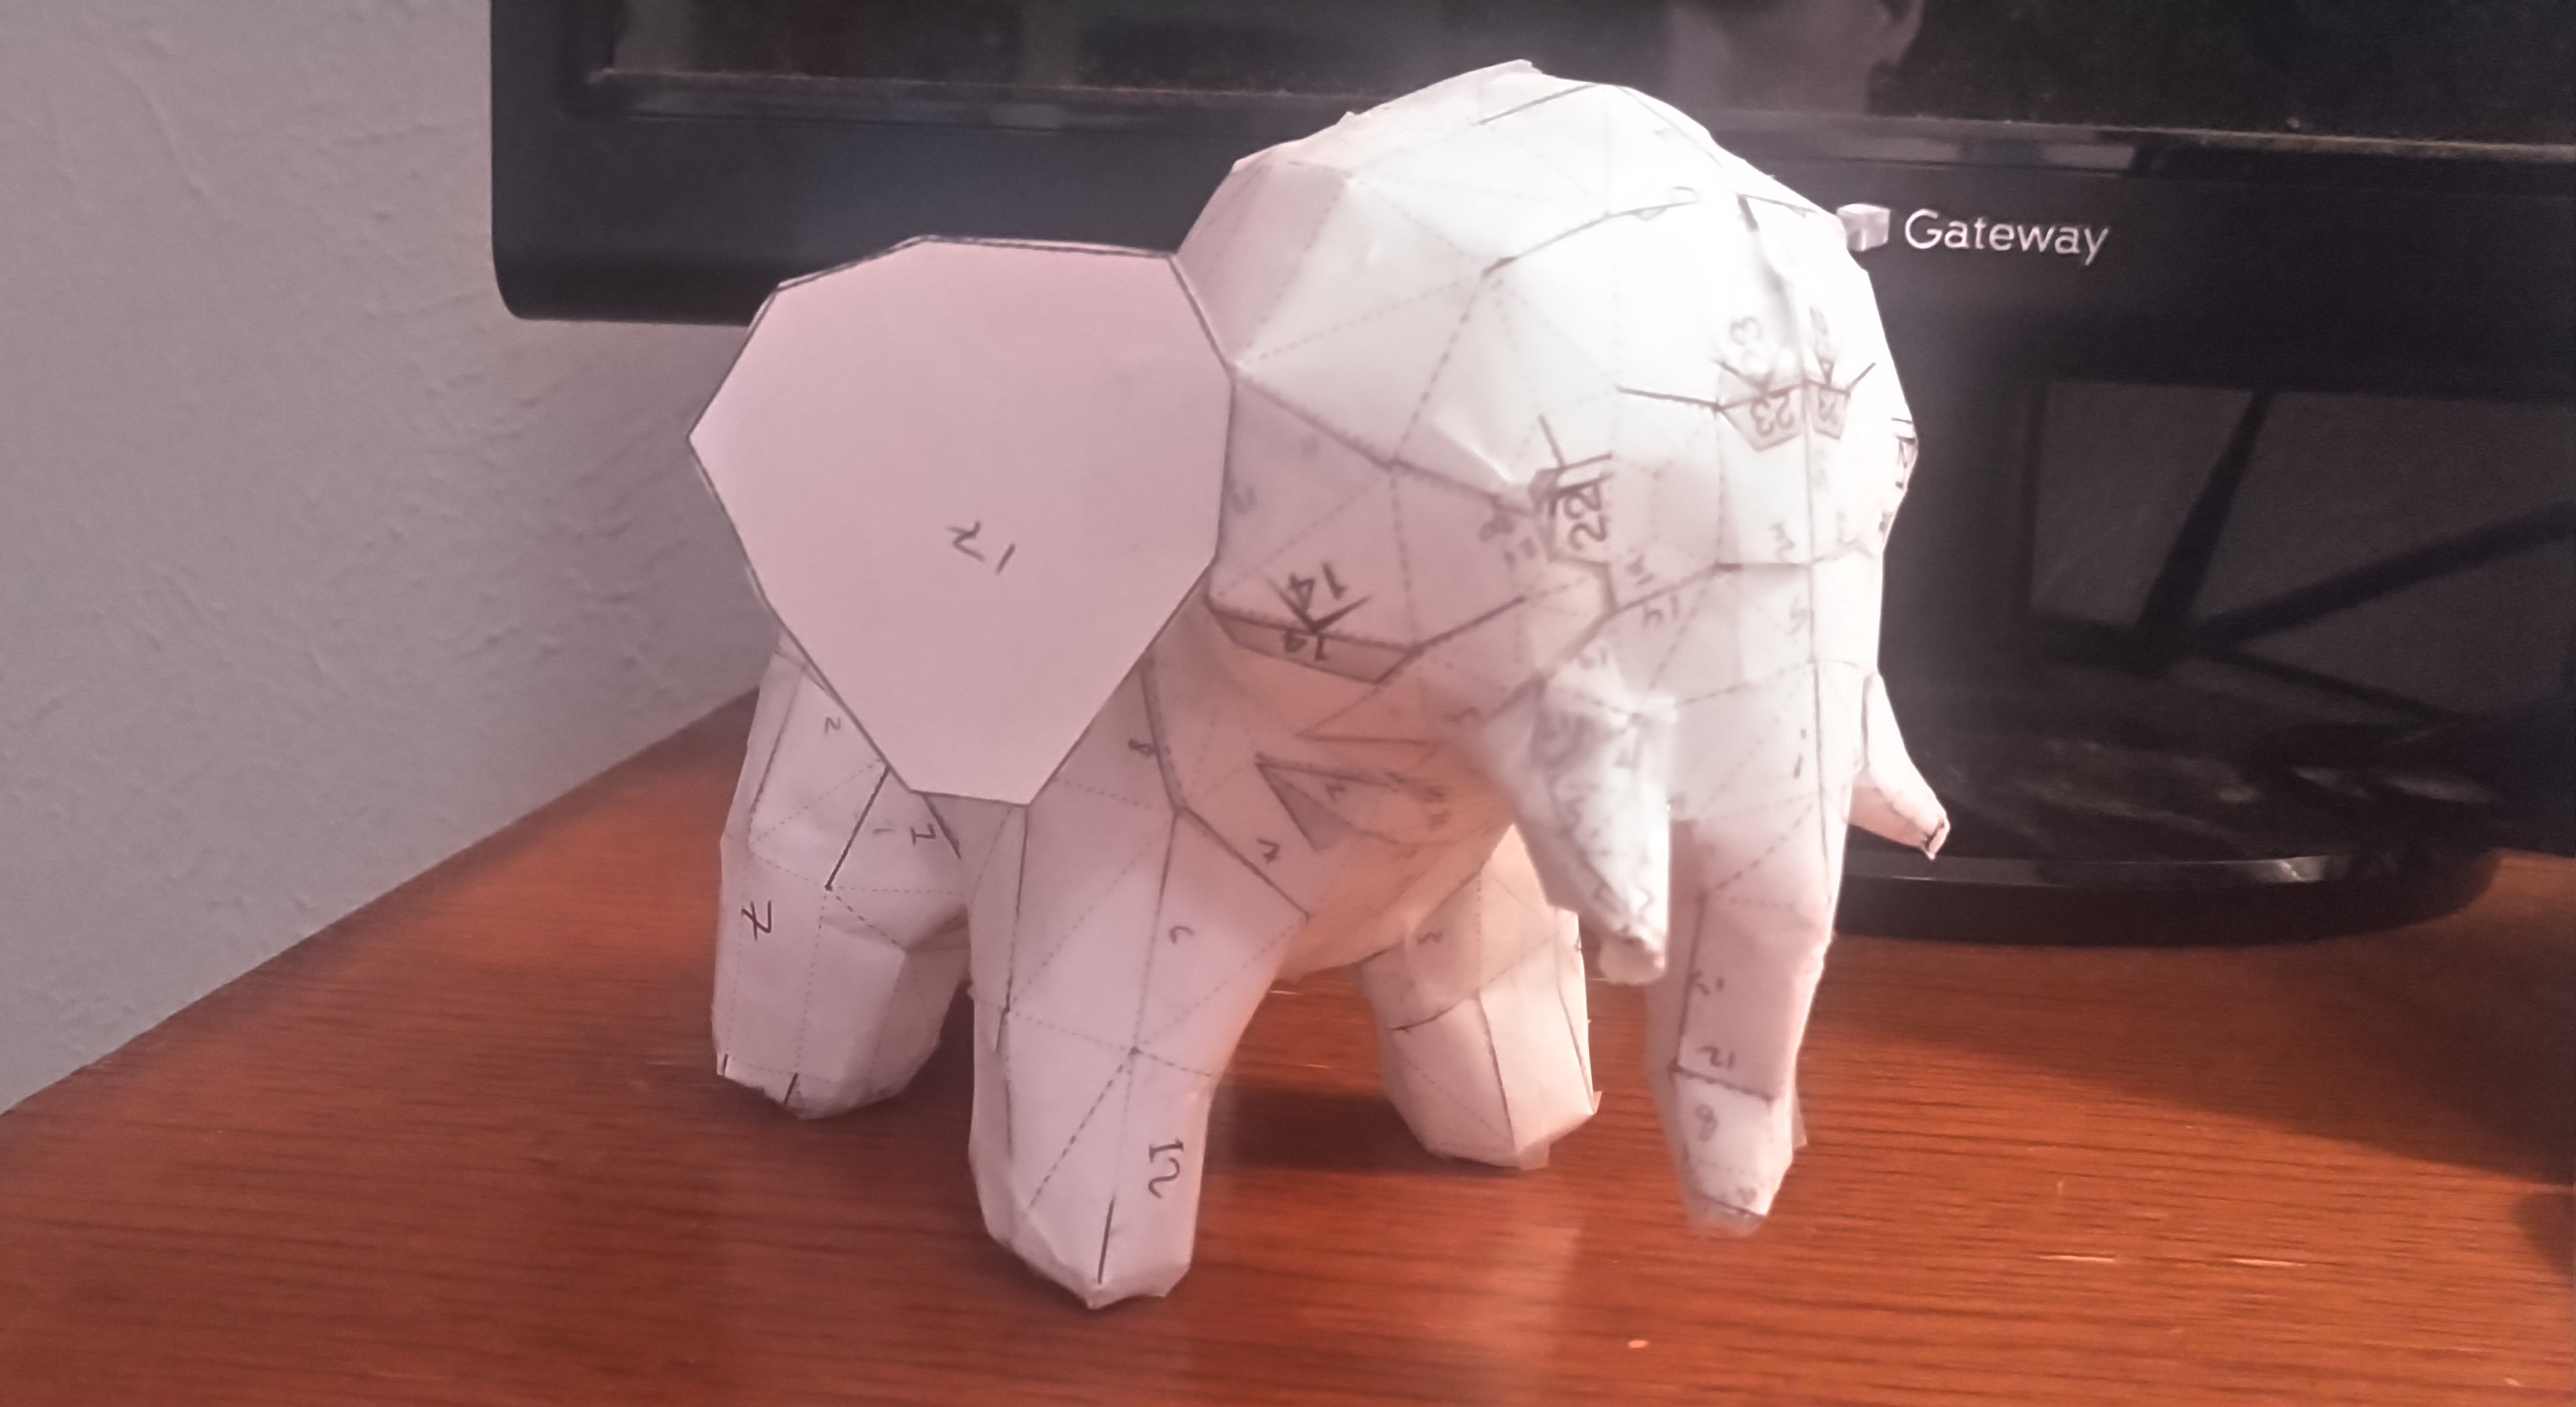 A paper model of an elephant